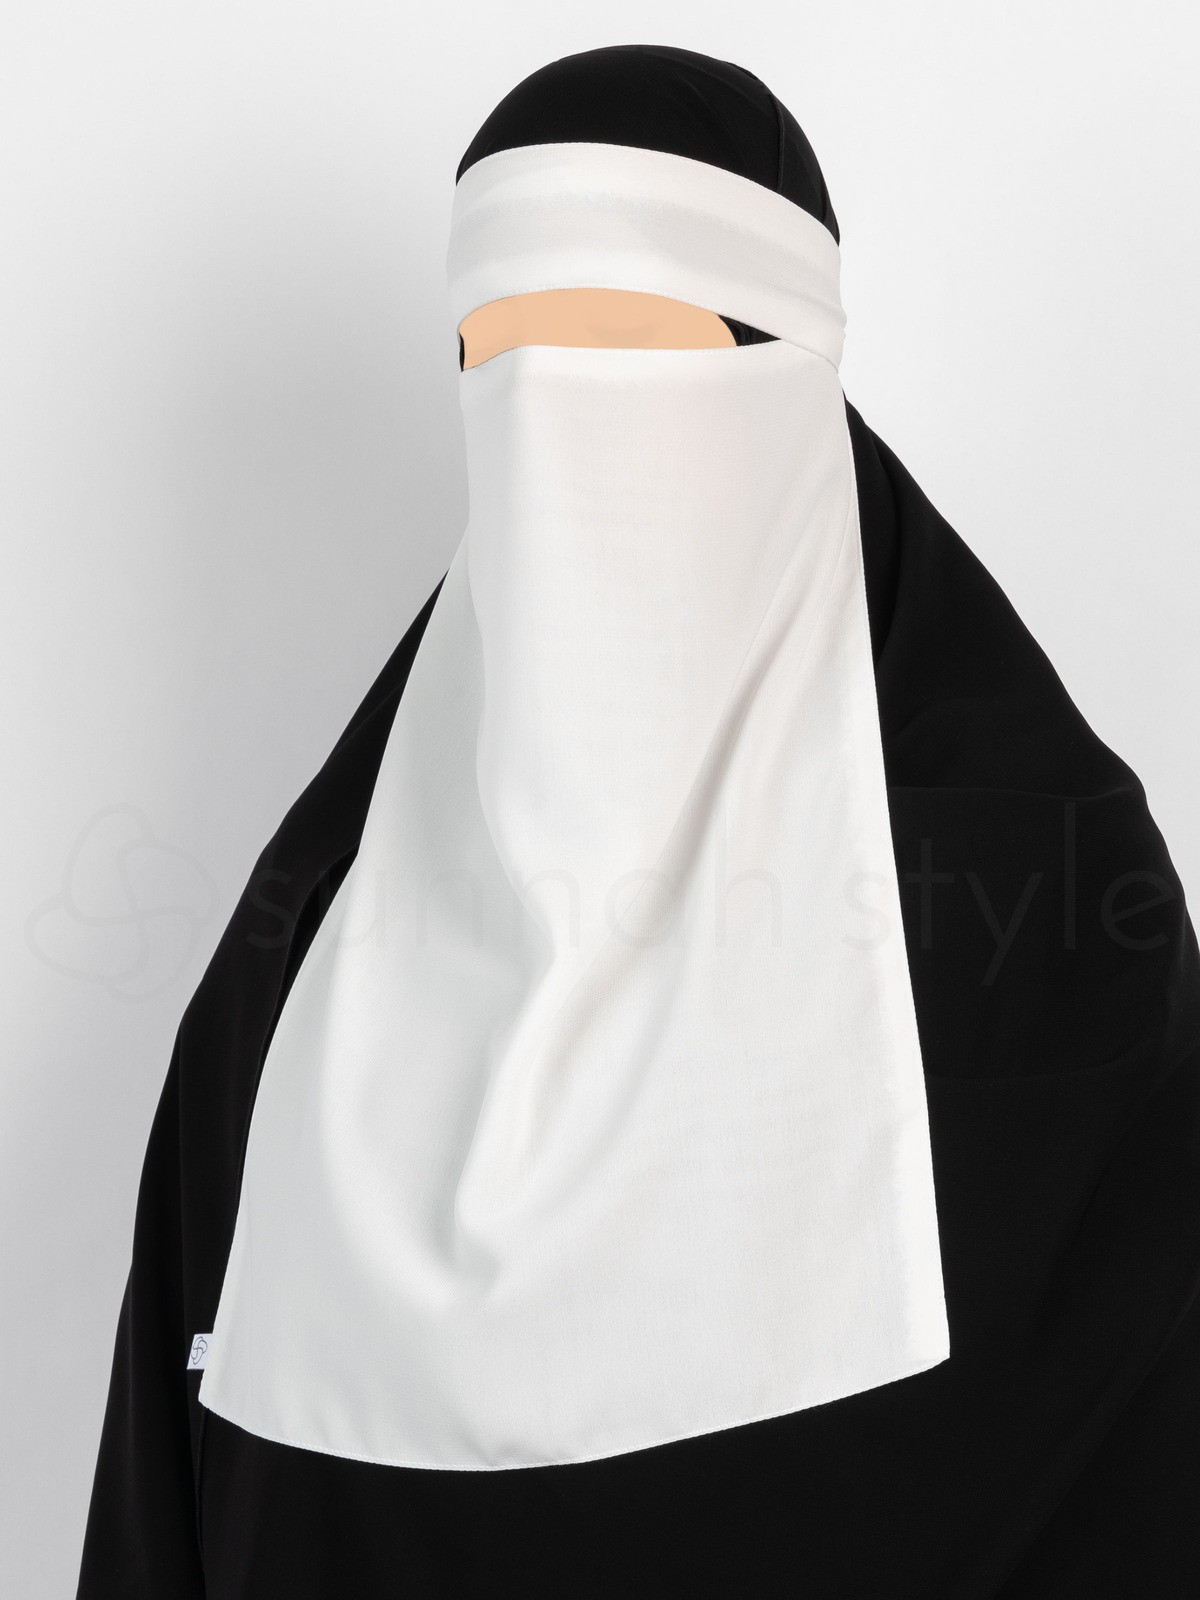 Sunnah Style - Pull-Down One Layer Niqab (White)